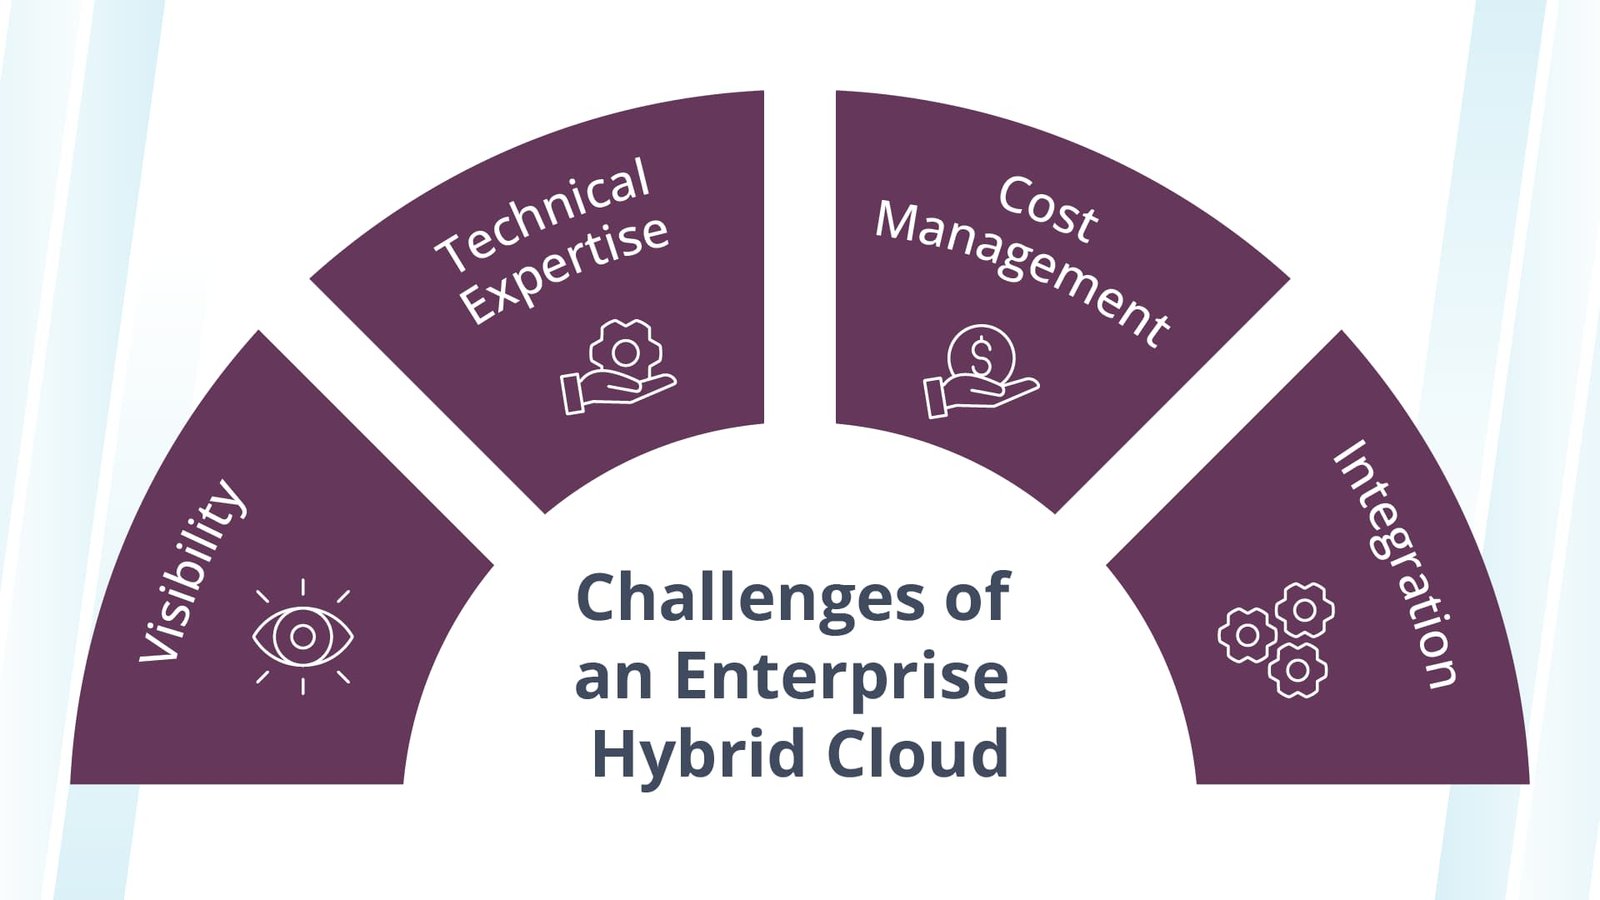 While an enterprise hybrid cloud offers many benefits, its potential challenges include cost management and visibility.